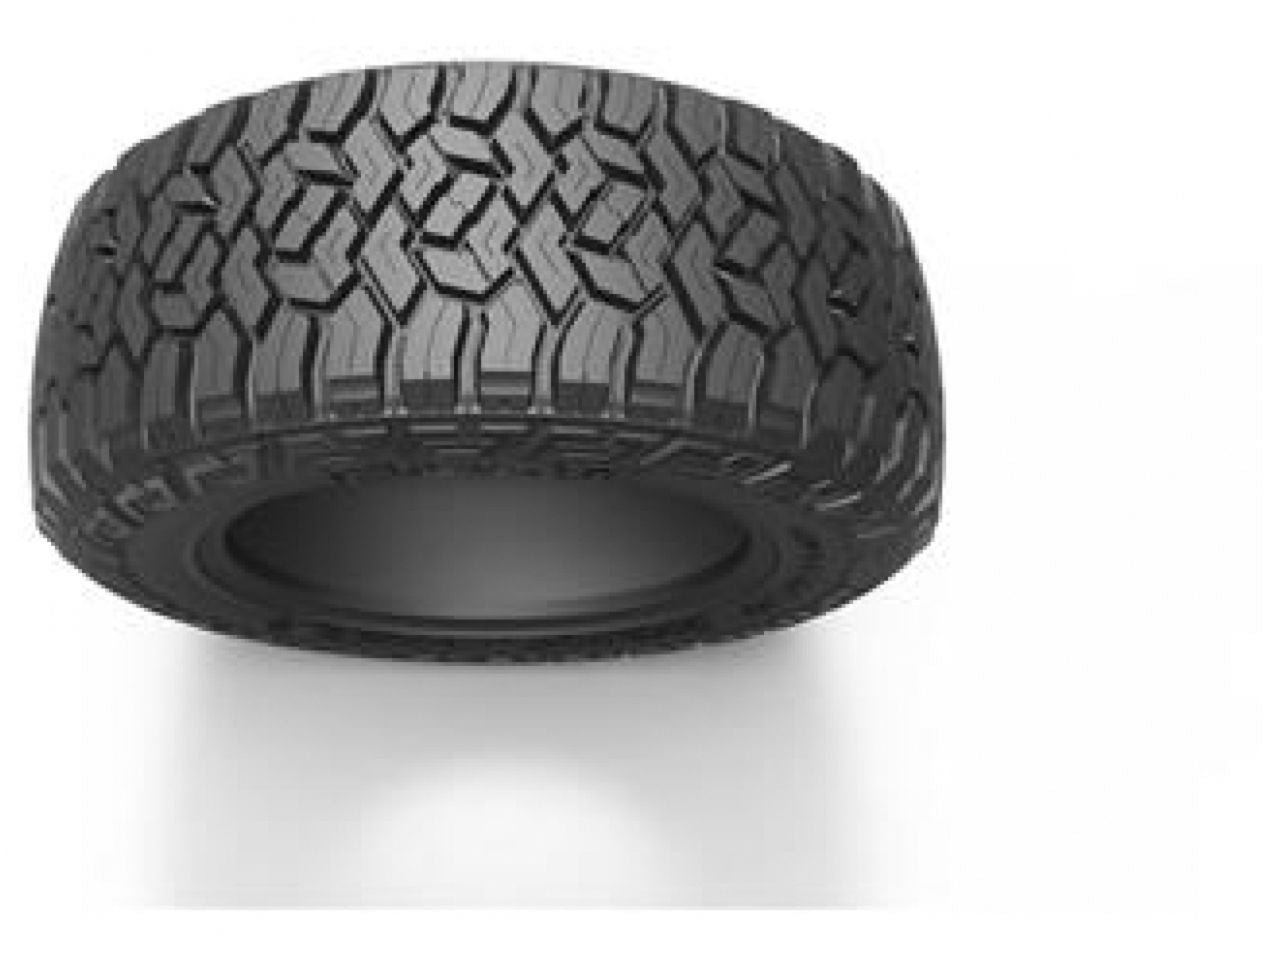 Fury Off Road 33x12.50R18 Tire, Country Hunter R/T